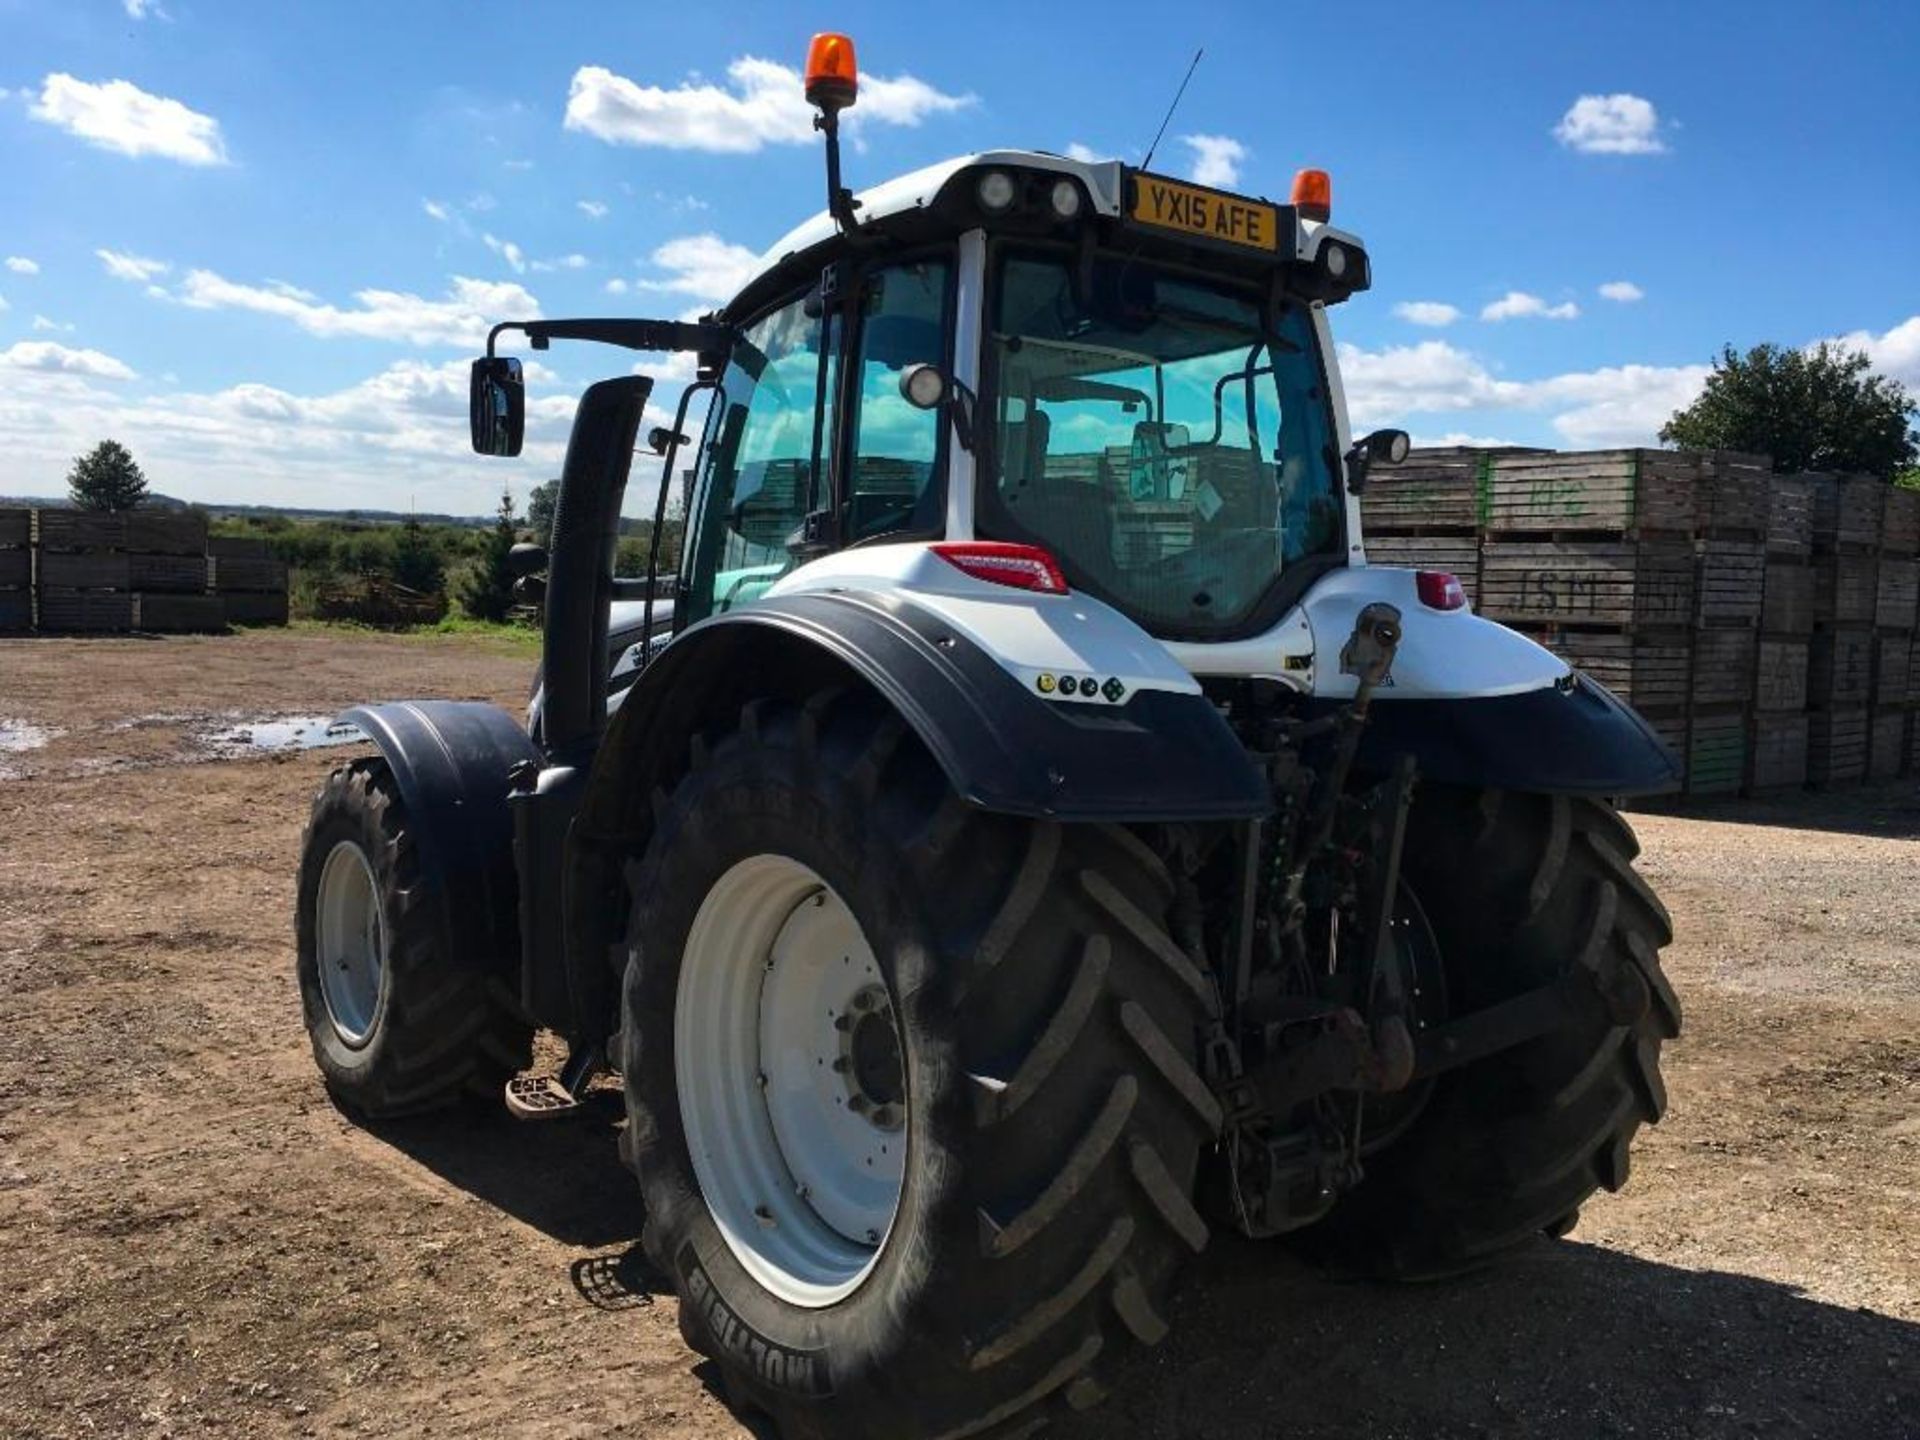 2015 Valtra T174 Versu 50kph tractor, powershift transmission, air suspension, 2 front and 4 rear sp - Image 8 of 15